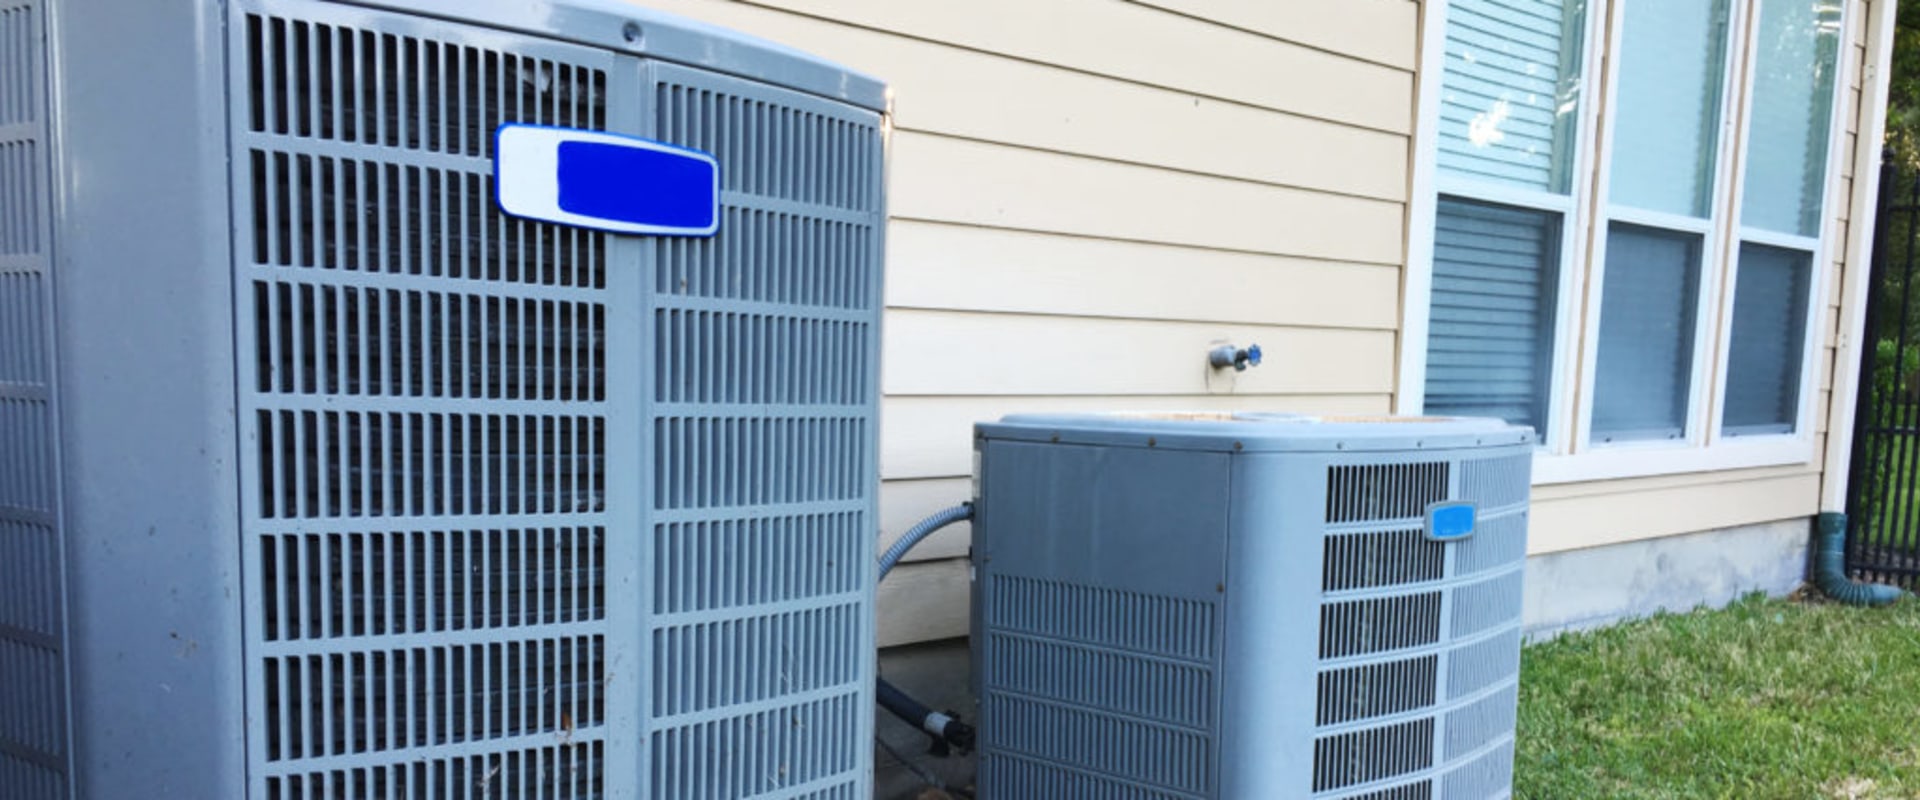 5 Essential Things to Consider When Choosing an HVAC Contractor